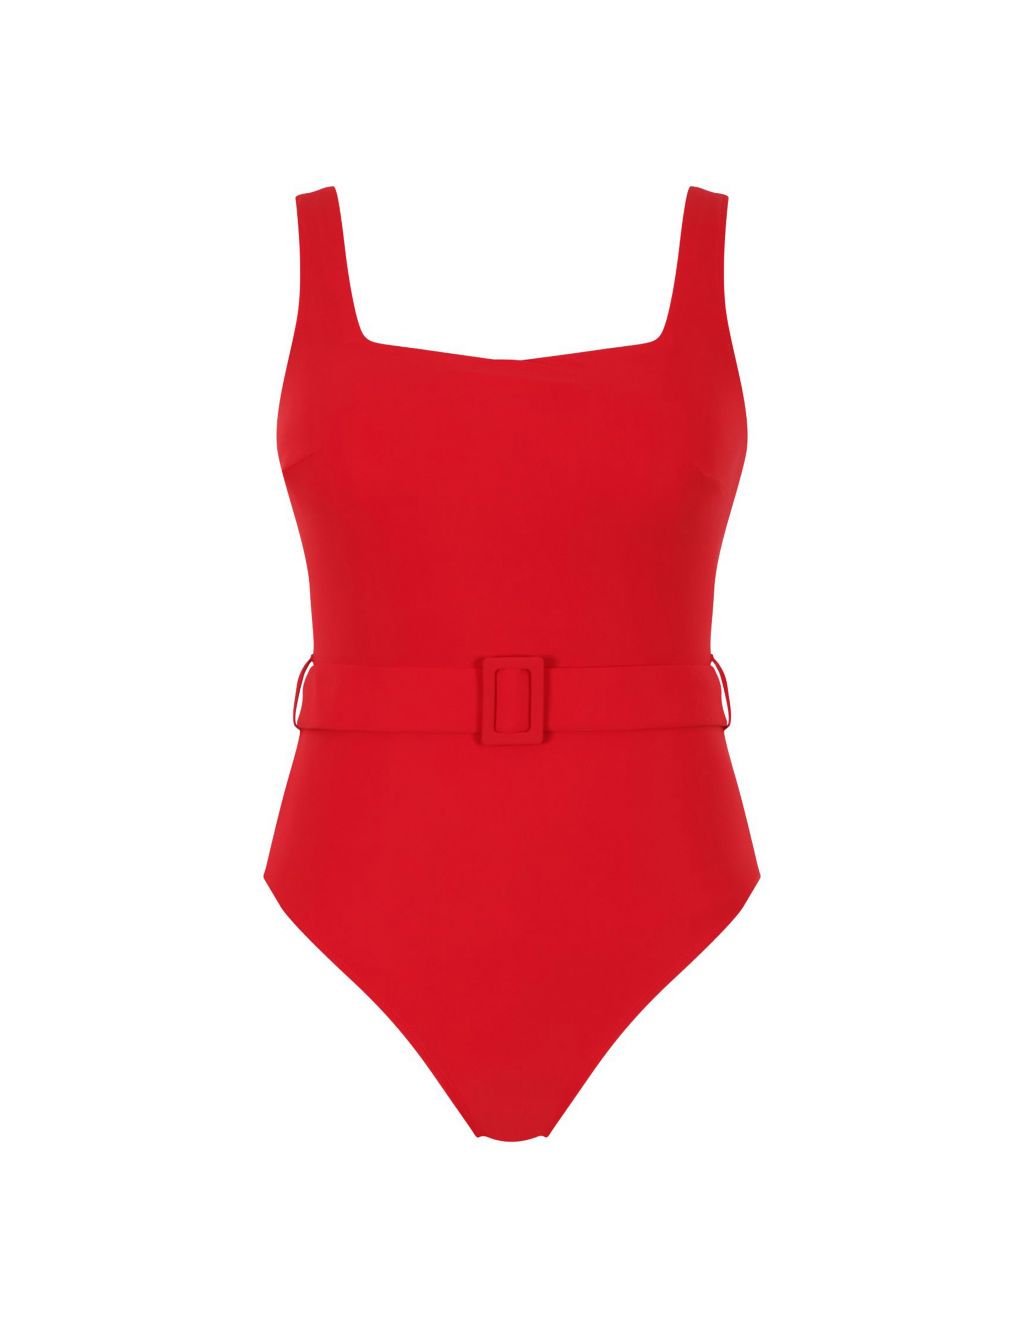 Serena Belted Square Neck Swimsuit image 2